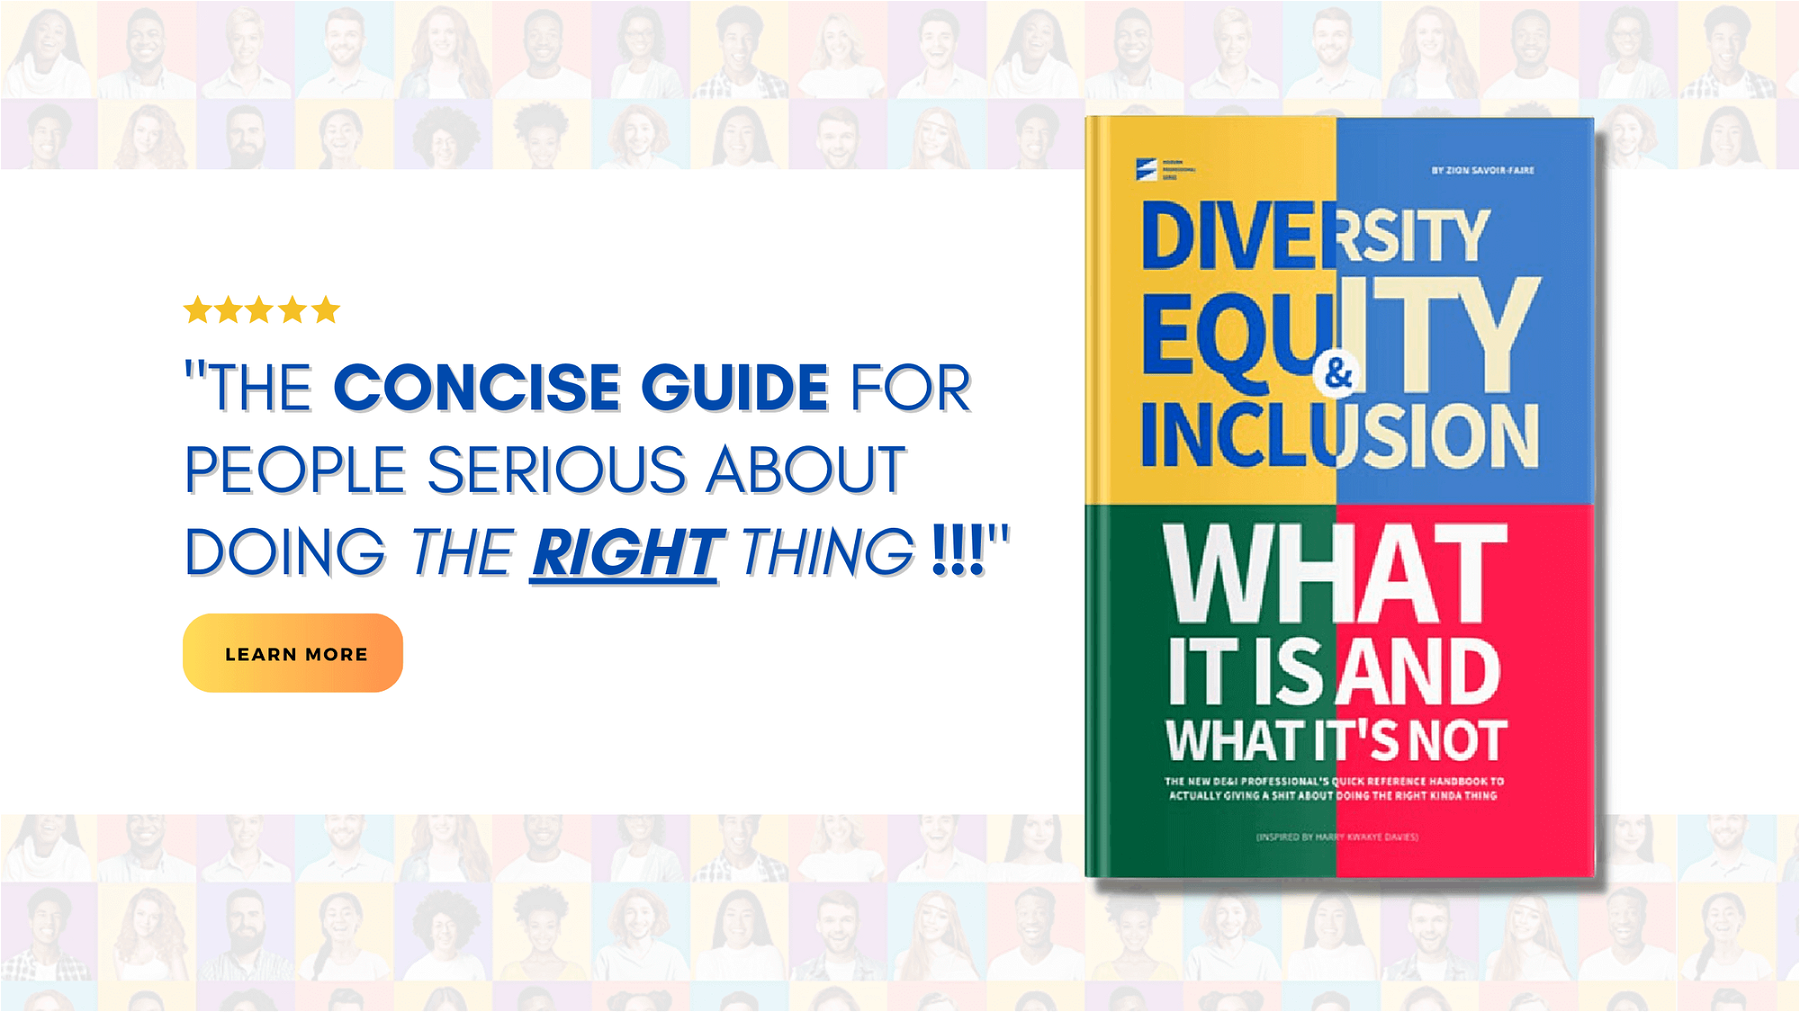 As workplace staff diversity increases, so must workplace Diversity, Equity & Inclusion efforts. This DEI Handbook seeks to answer the question “Why is DEI important?”